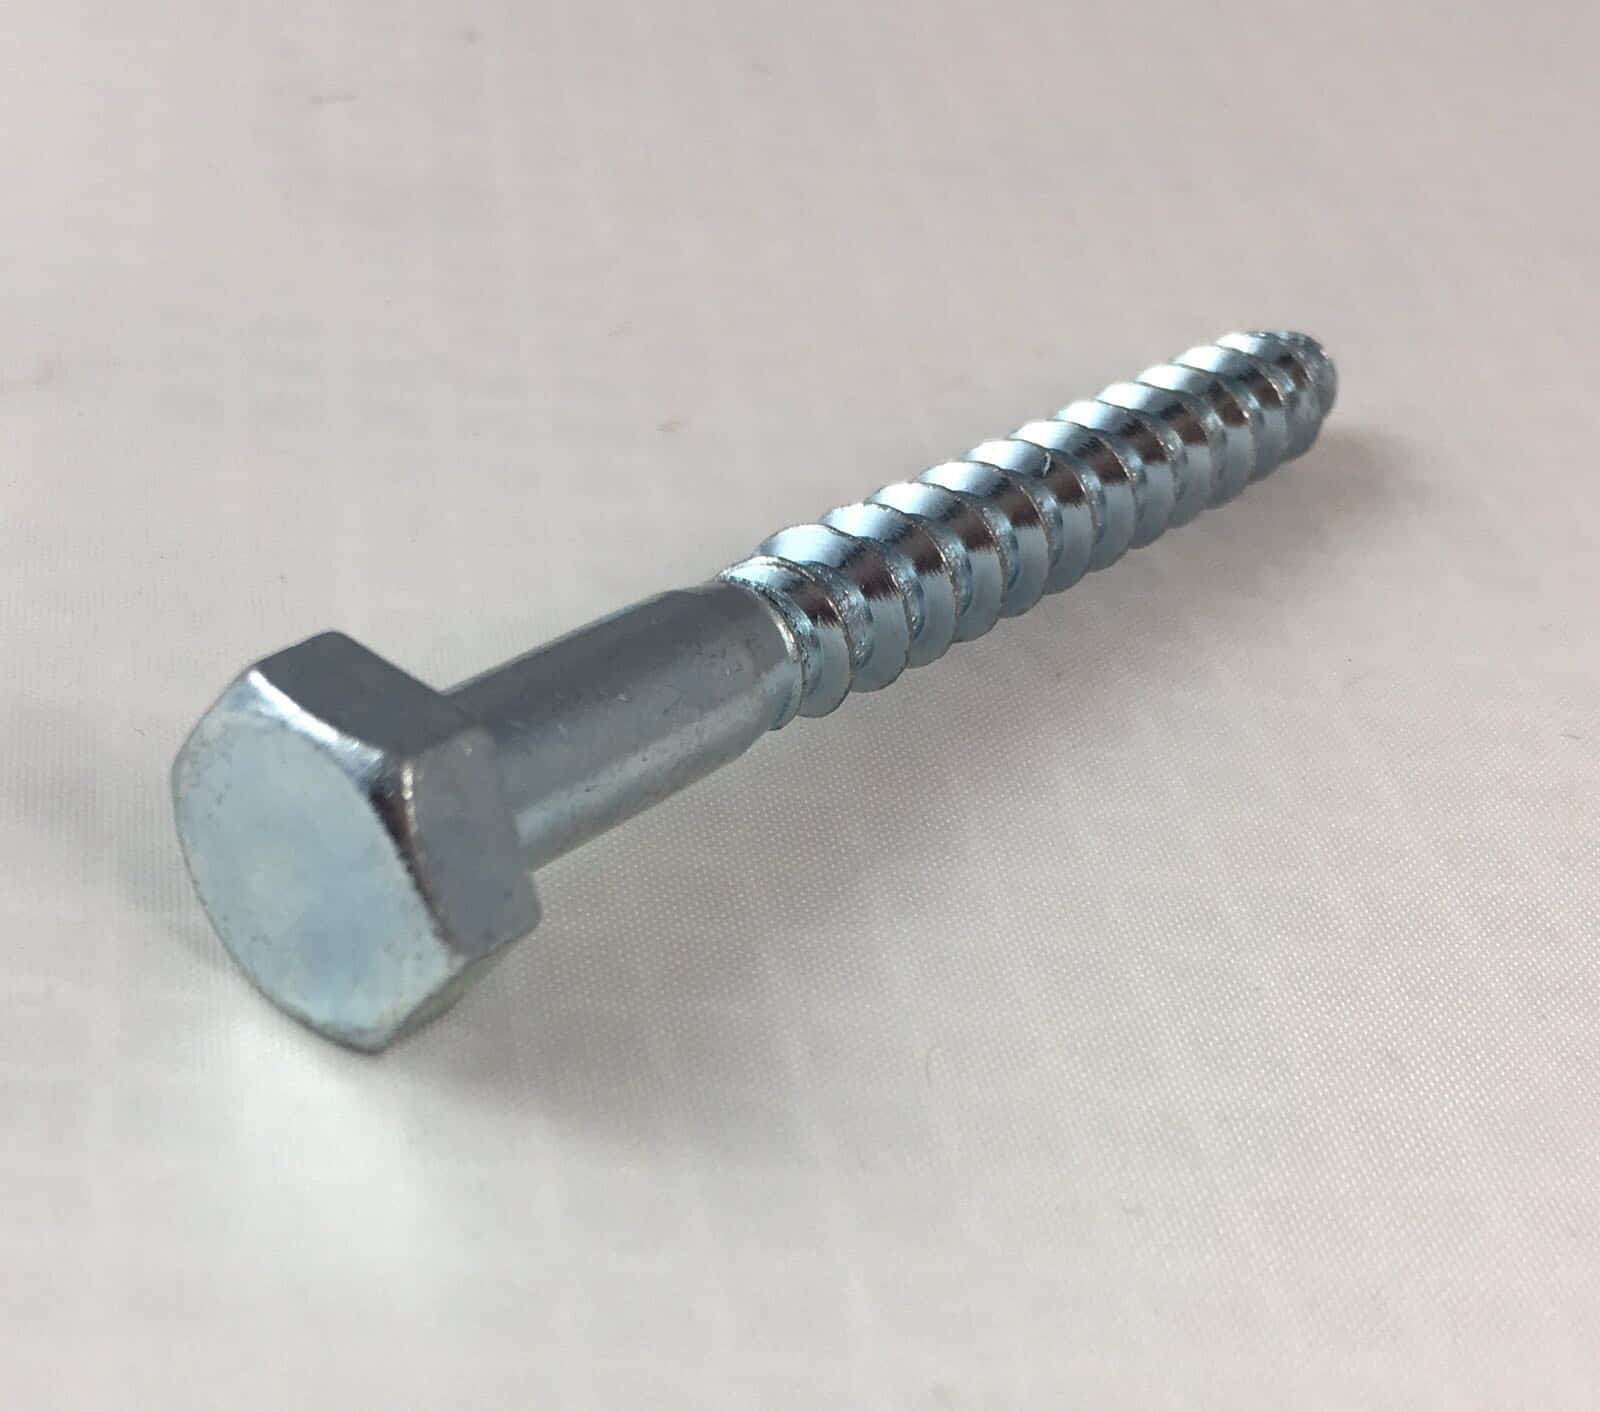 Metric Coach Screw (All pictures are shown for illustration purposes only. Actual product may vary)